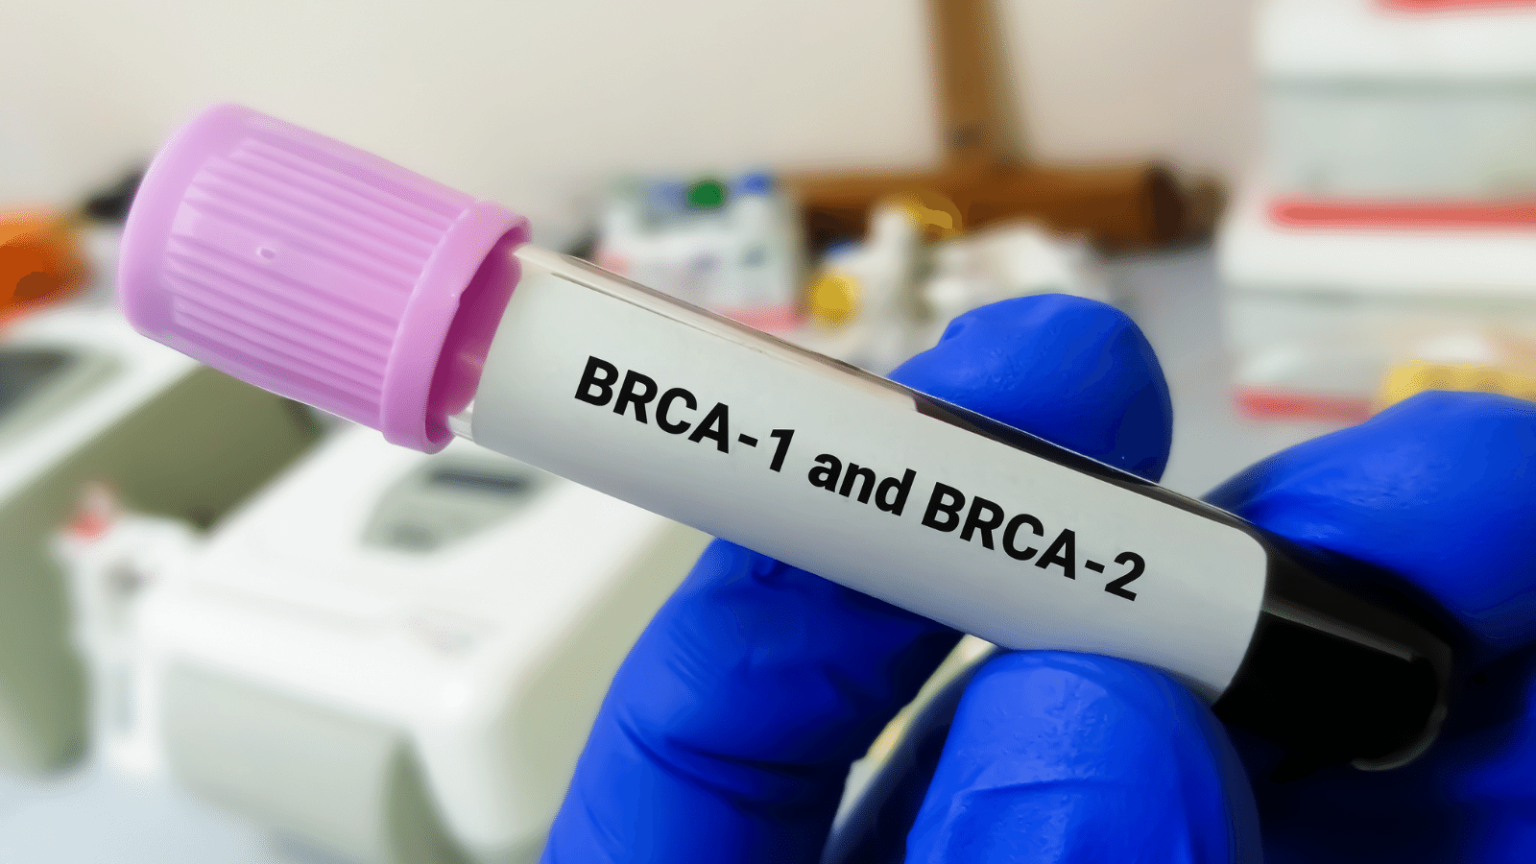 BRCA Genes and Women’s Cancer Risk